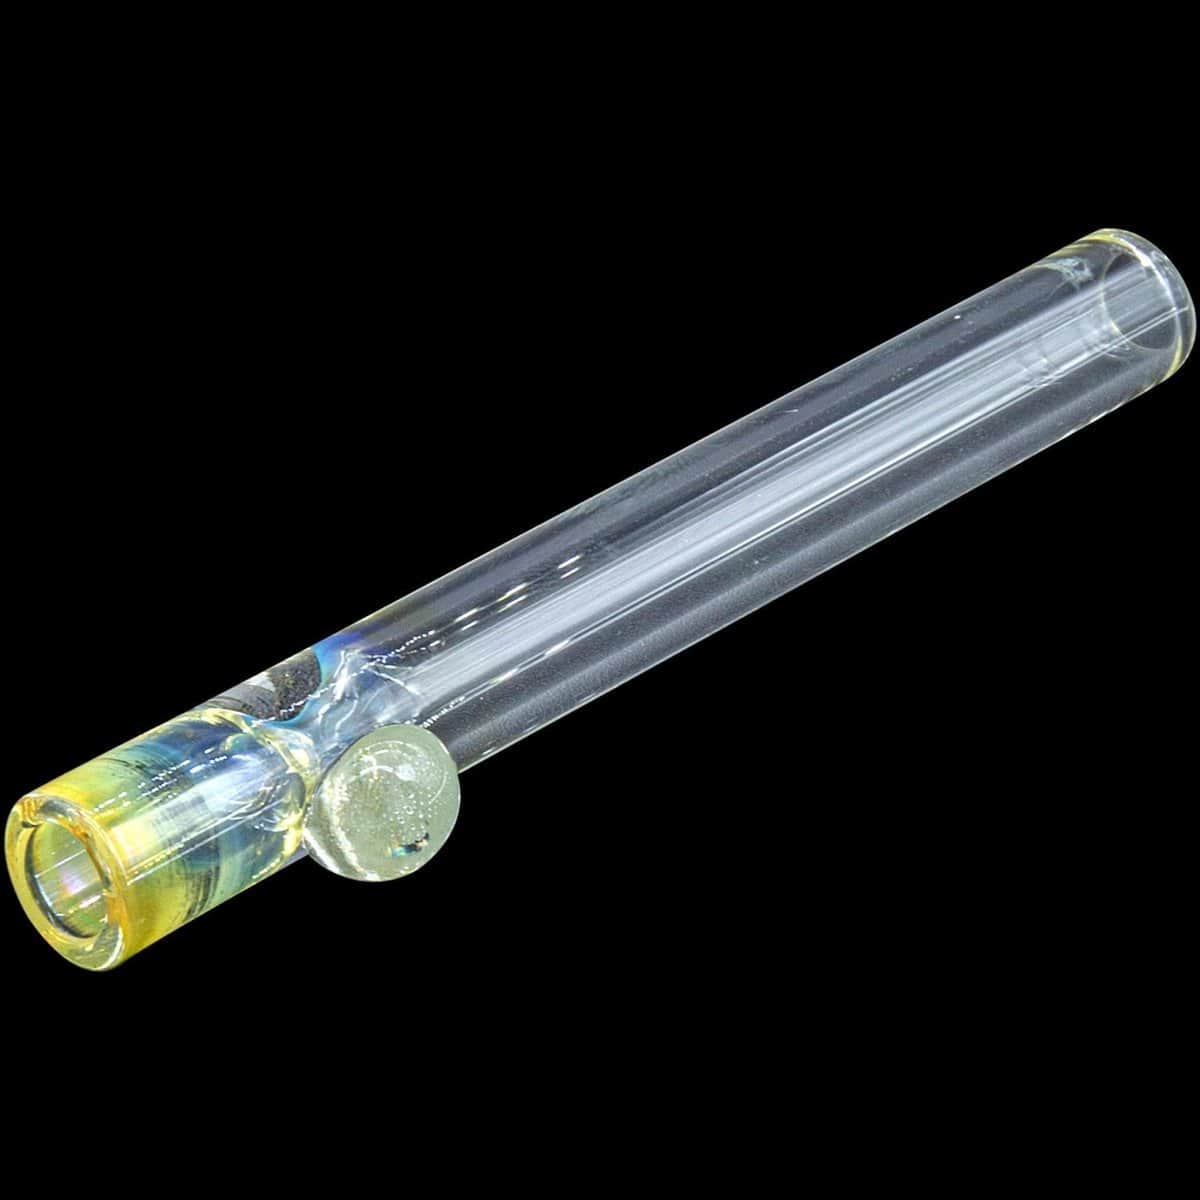 LA Pipes Hand Pipe "One Hitter Never Quitter" Glass One-Hitter